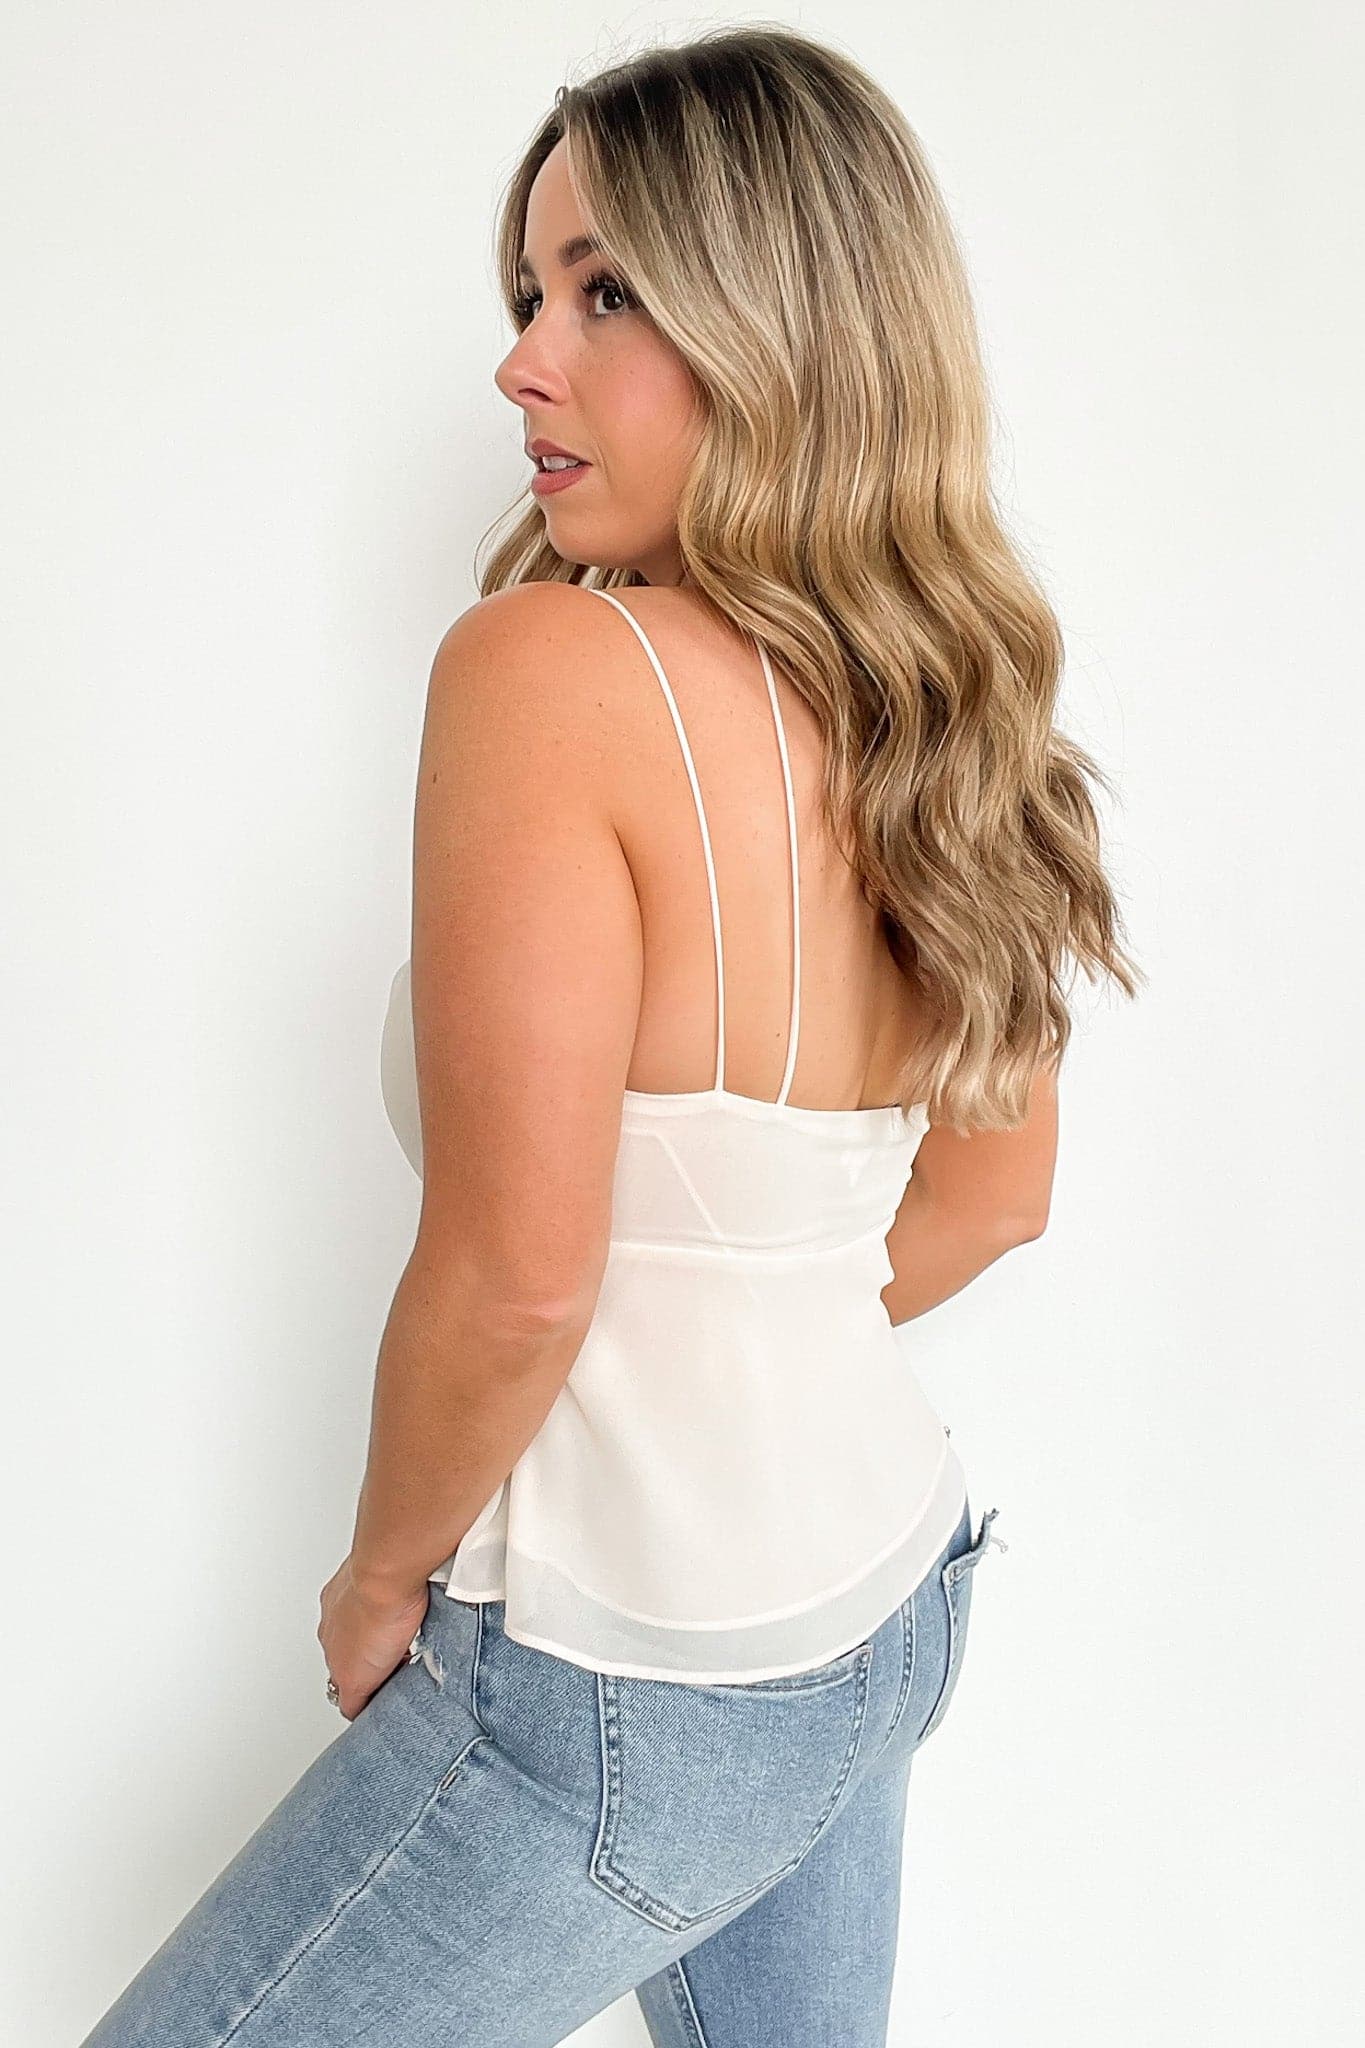  Entirely Yours Strappy Cowl Neck Cami Top - FINAL SALE - Madison and Mallory